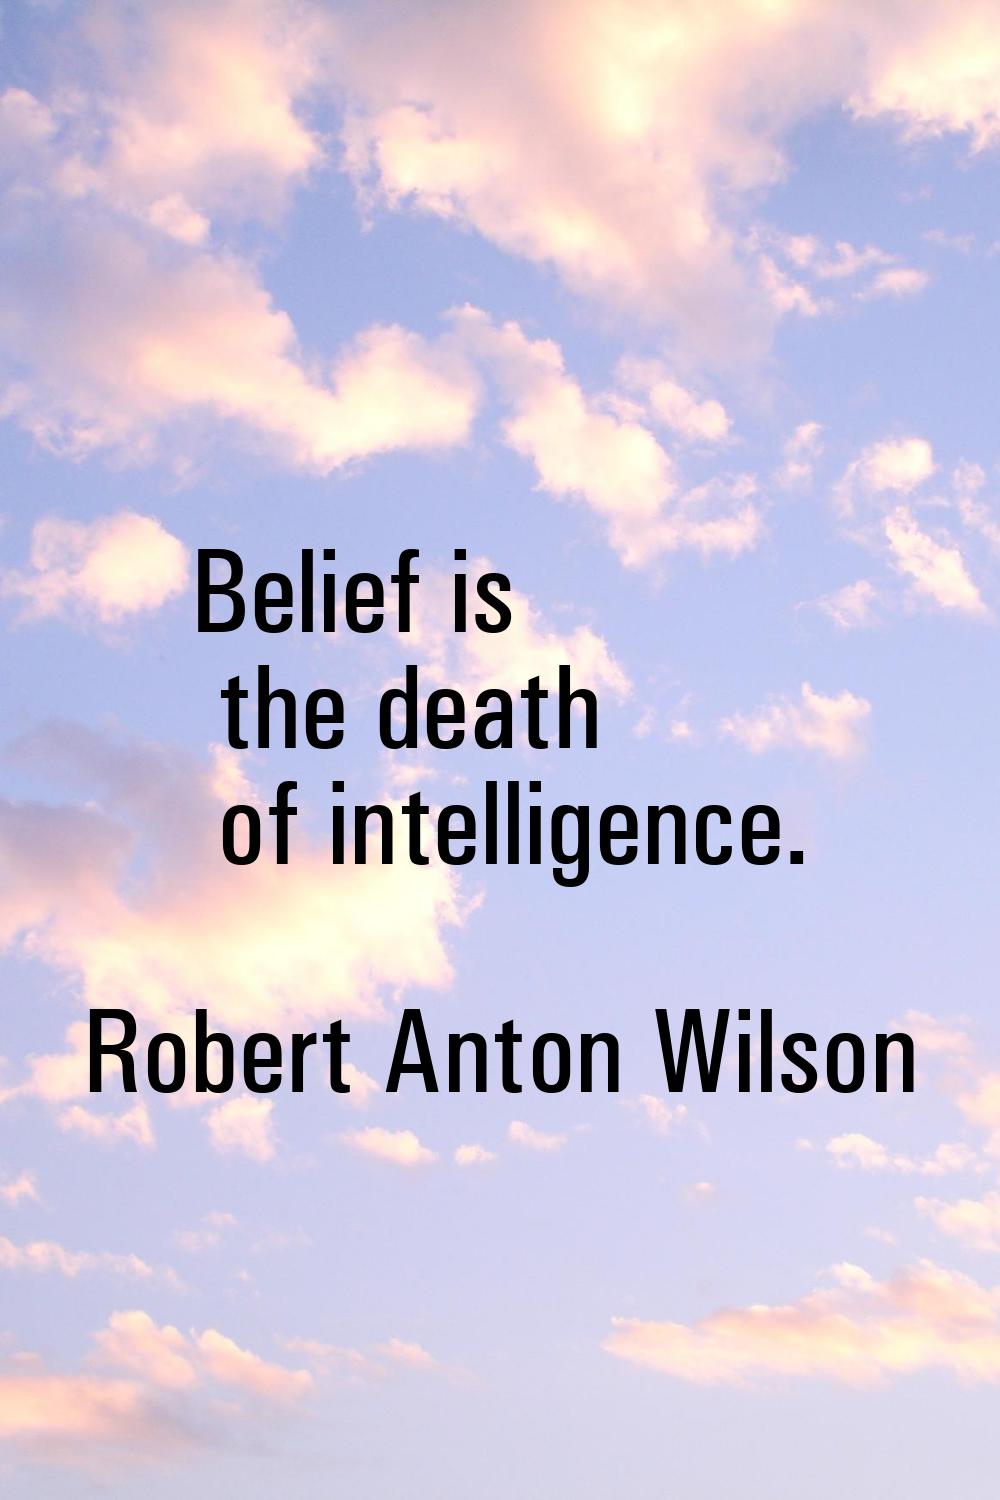 Belief is the death of intelligence.